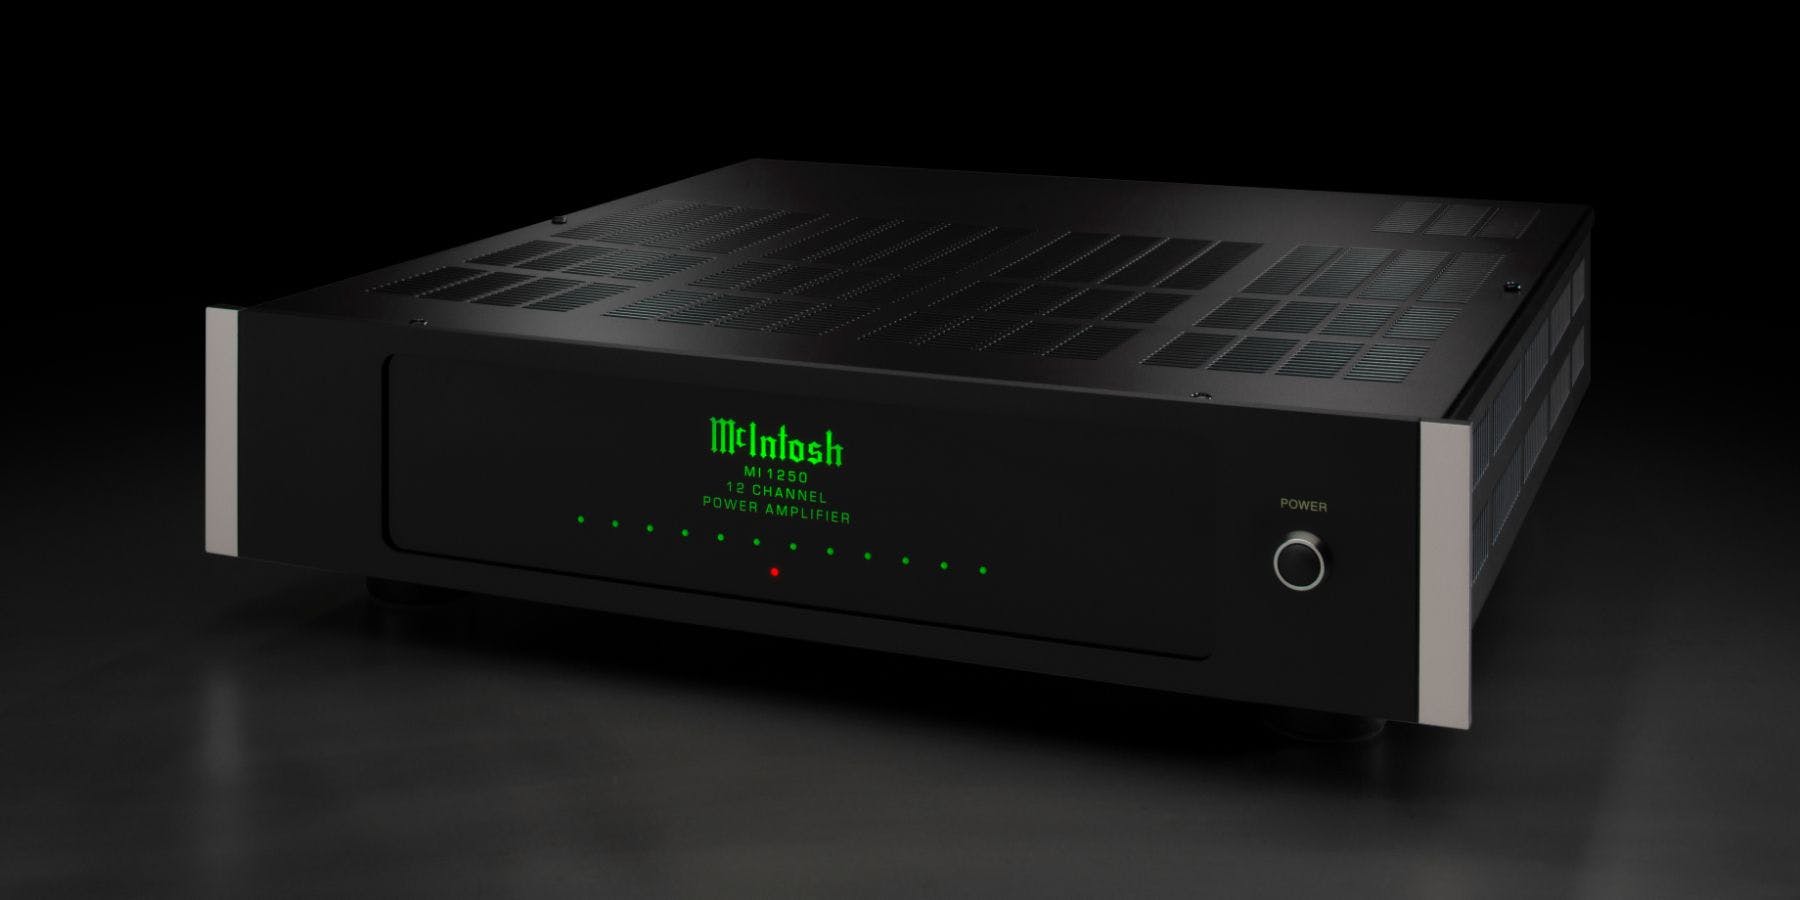 McIntosh introduce the MI1250 digital amplifier - quality and power in 12 channels